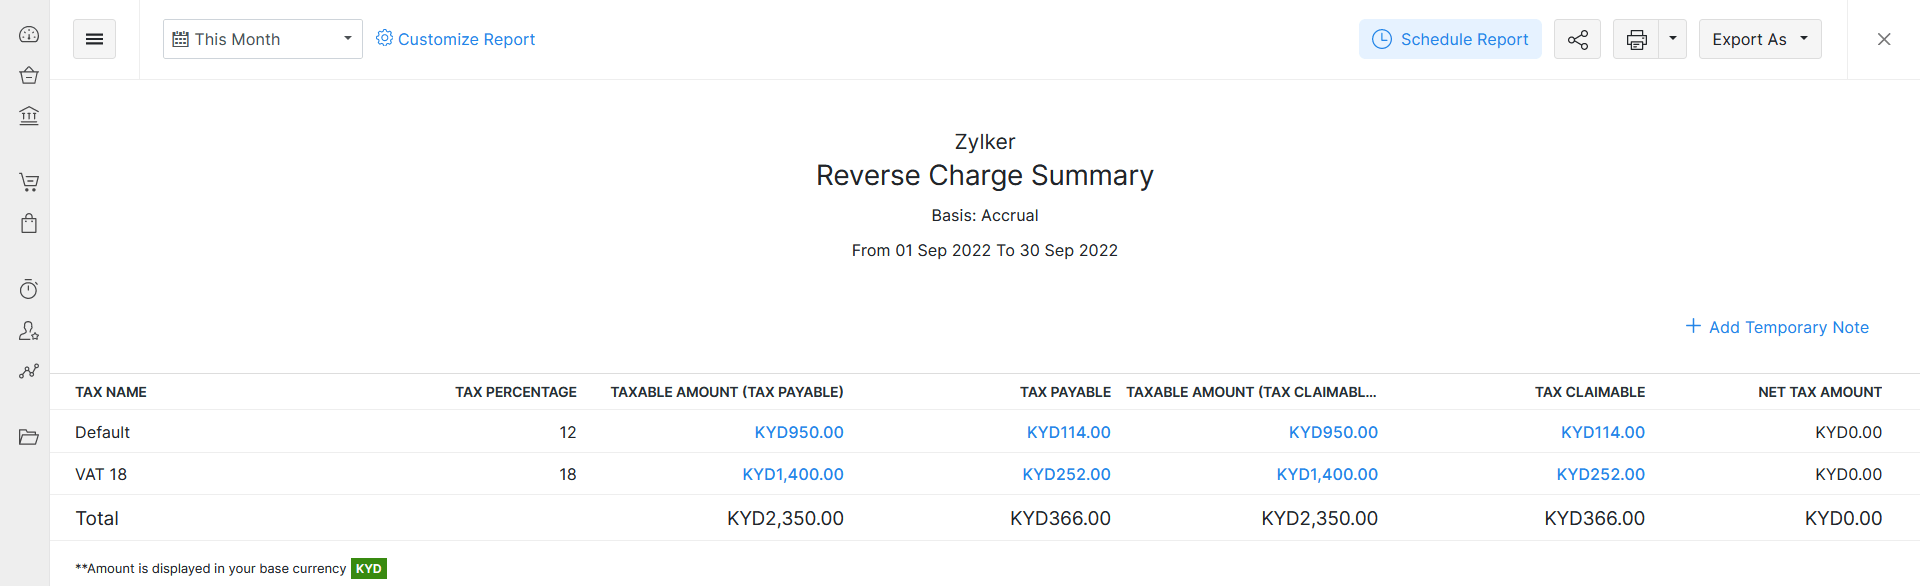 Reverse Charge Summary report